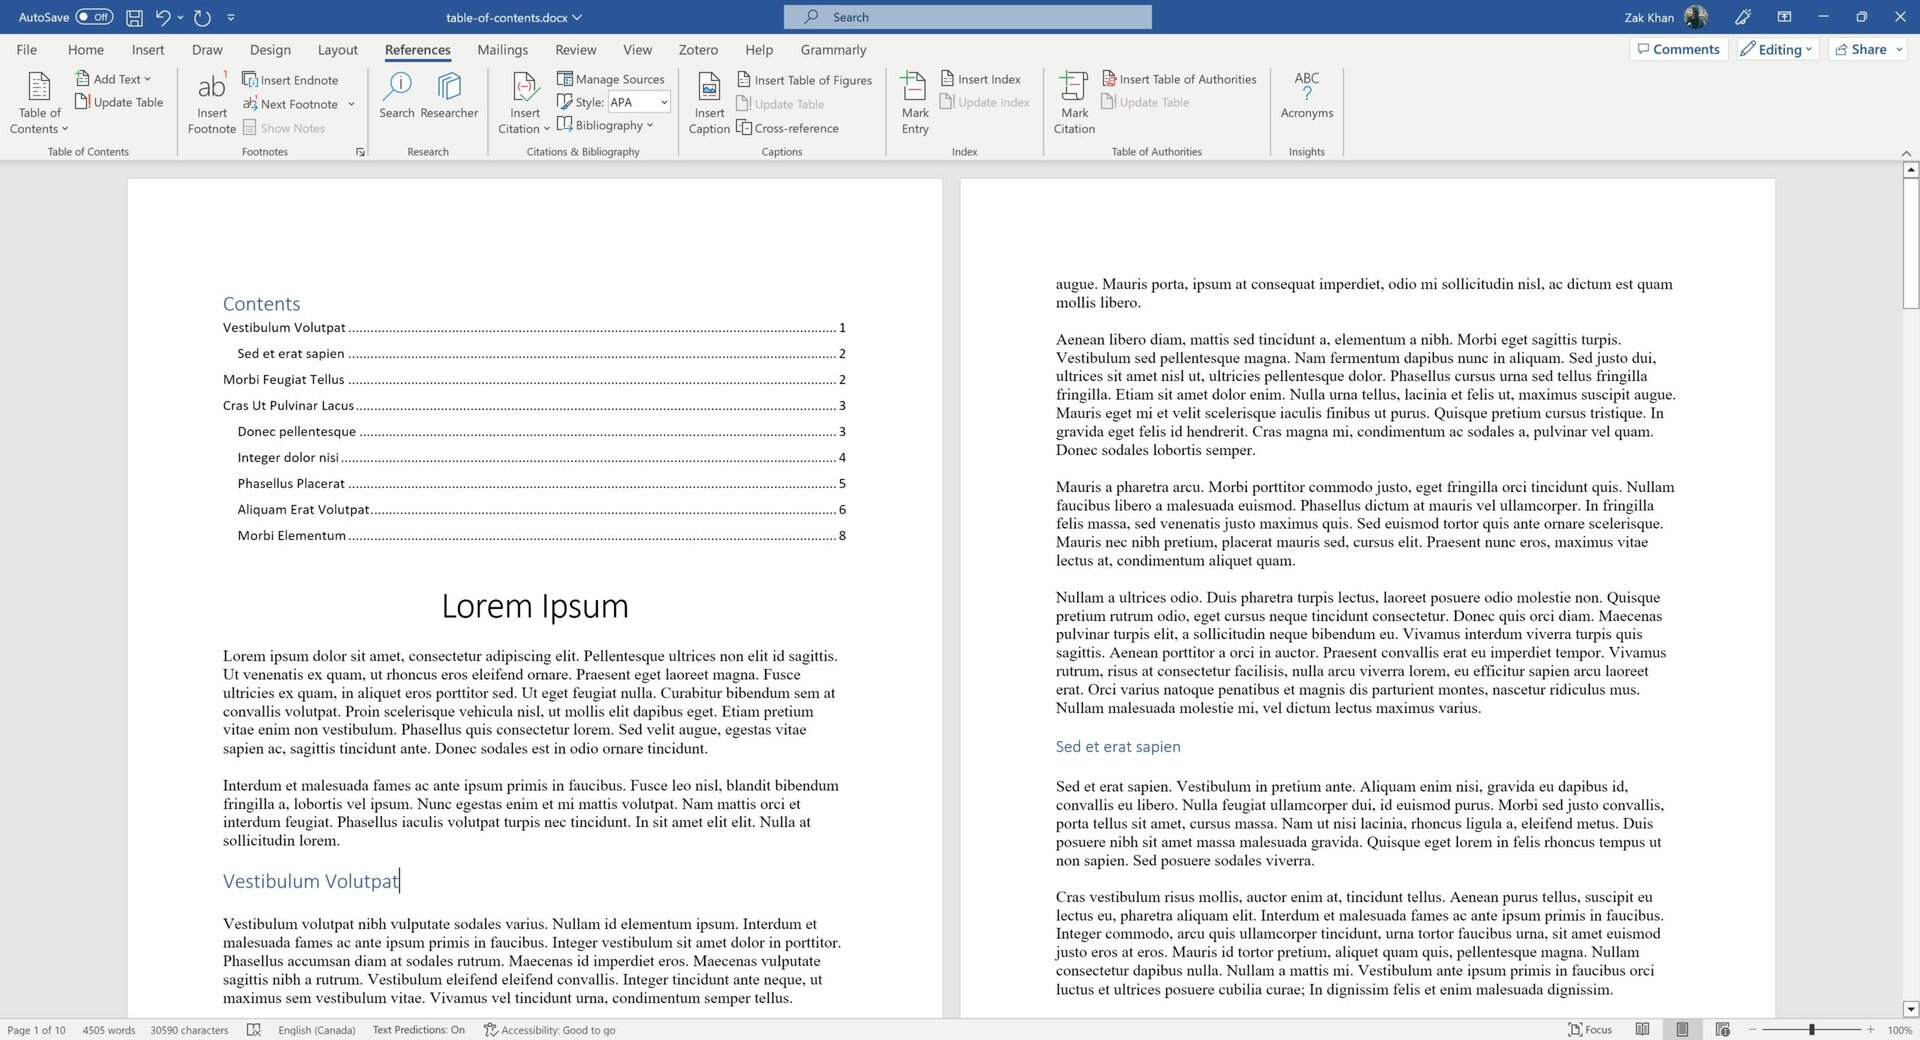 A screenshot of Microsoft Word showing a table of contents in a document.